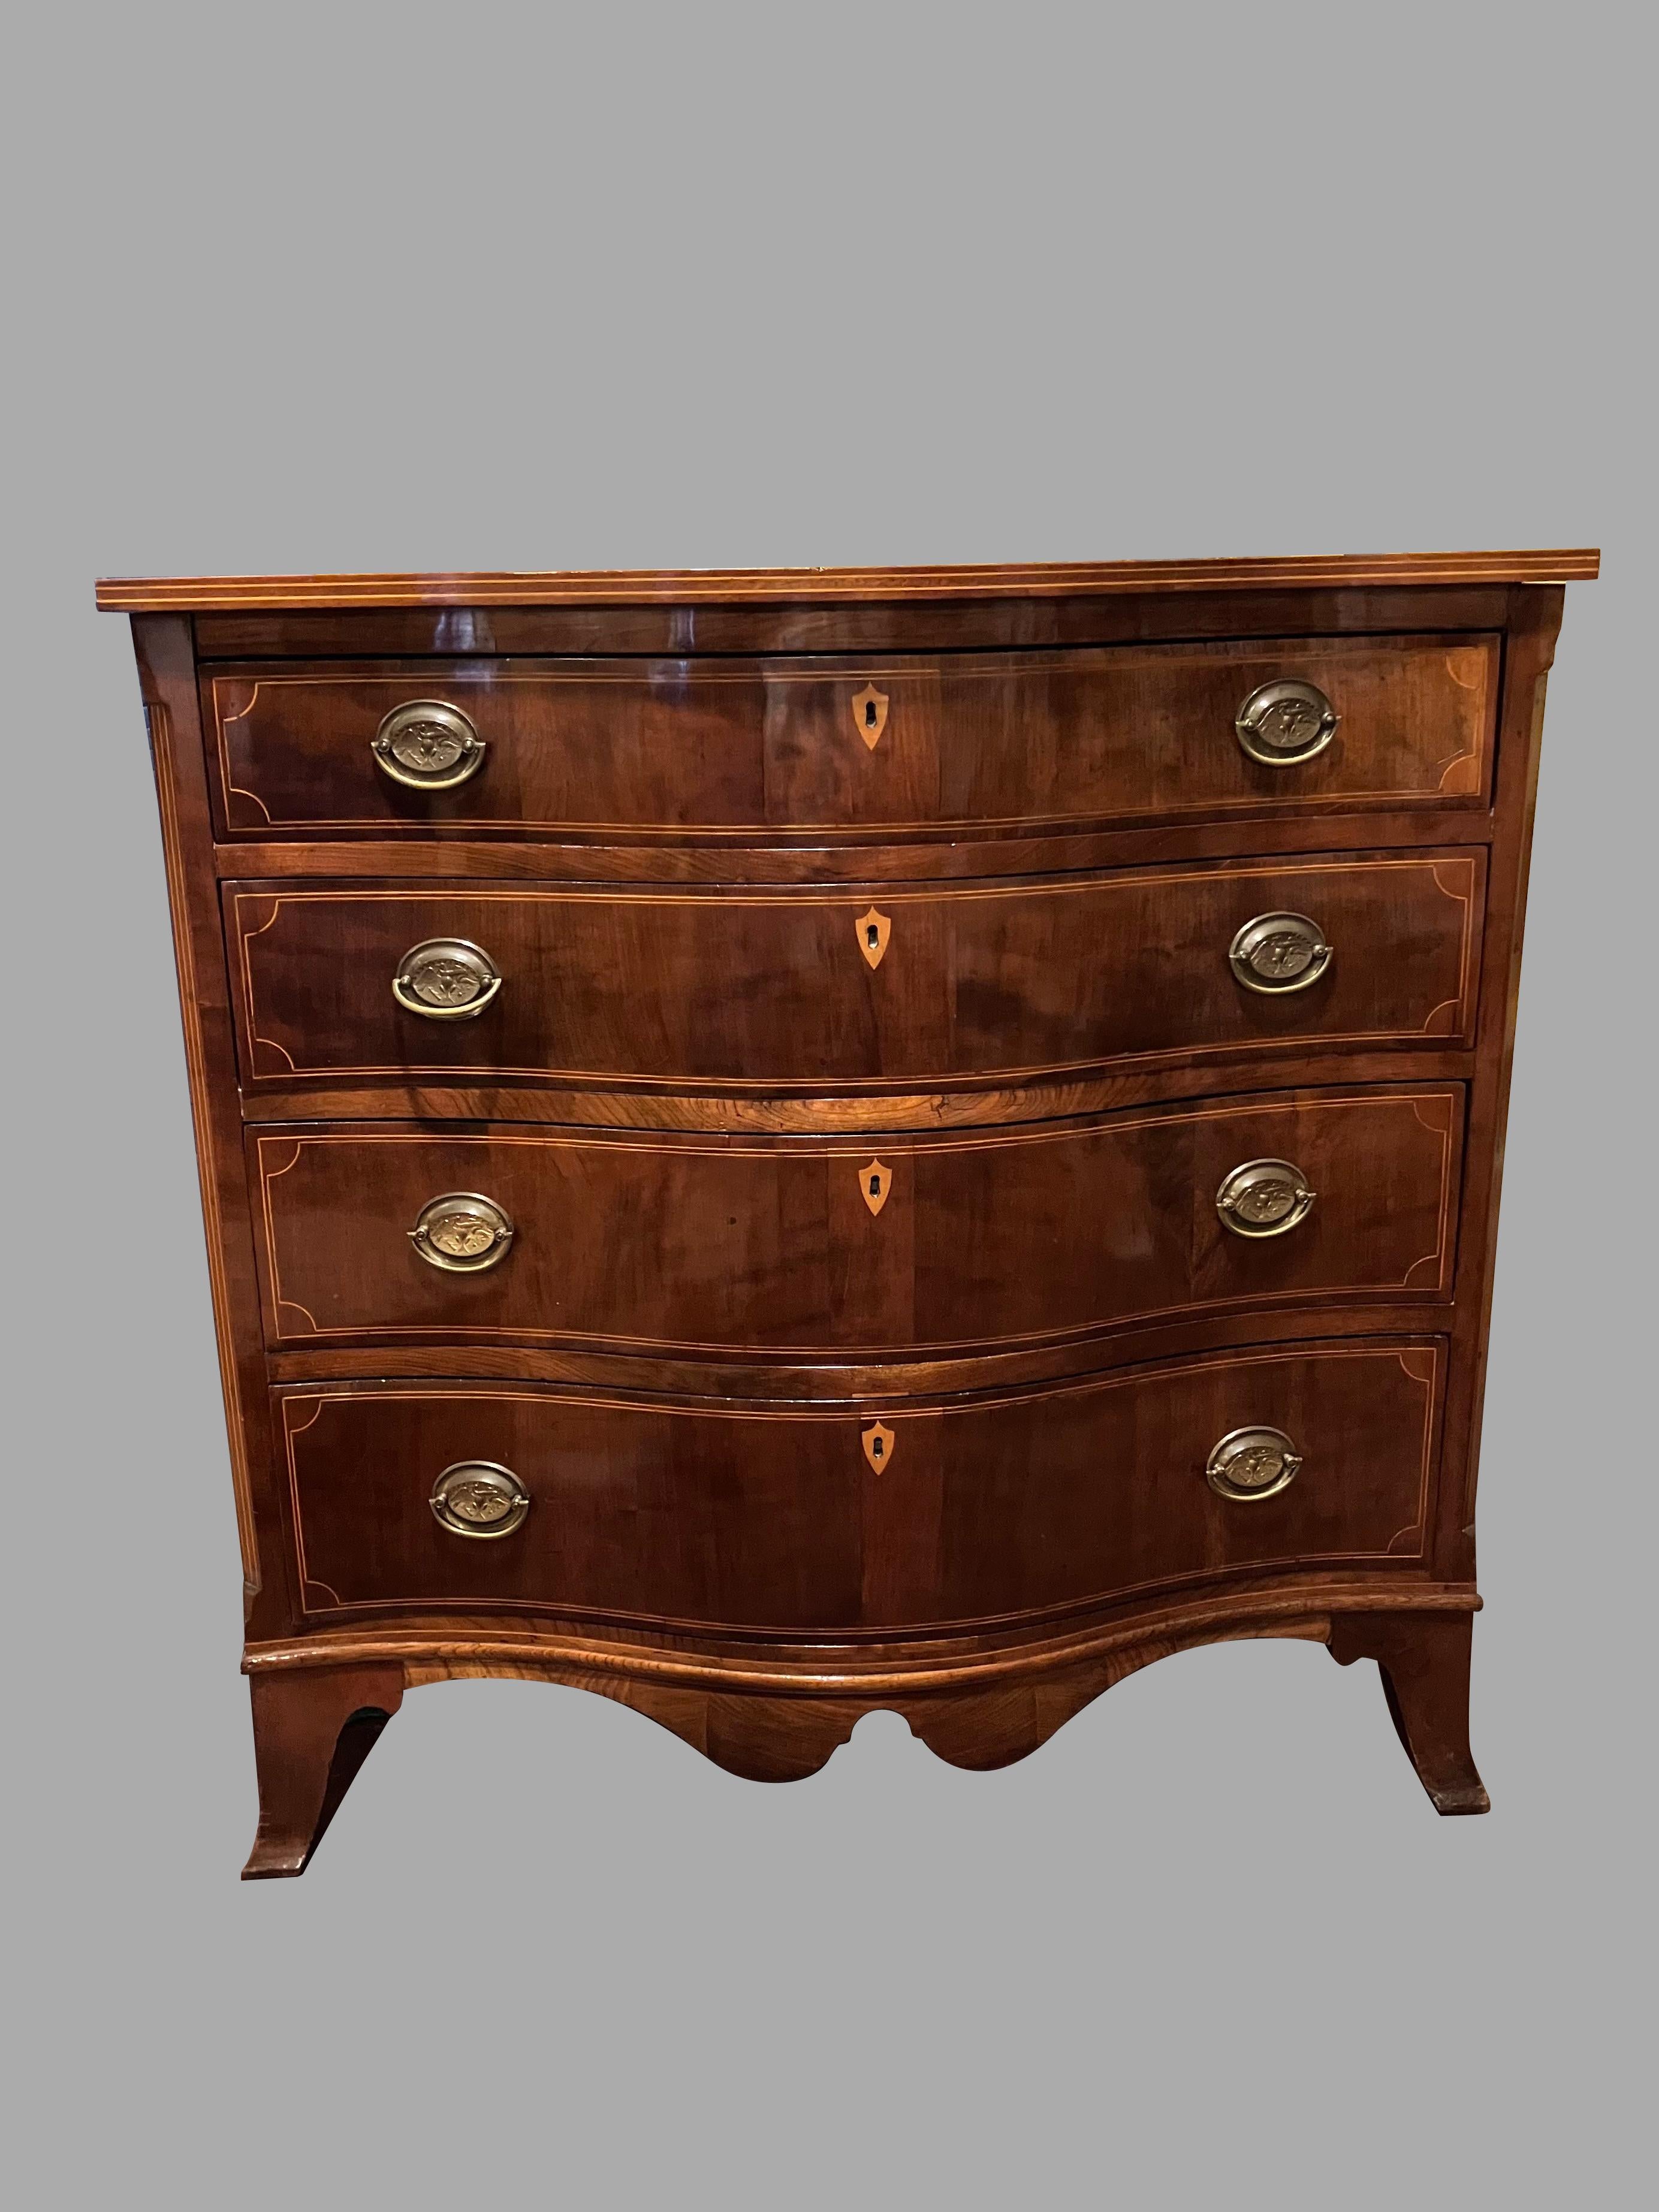 A good quality American Hepplewhite style inlaid mahogany chest of drawers of serpentine form, the well-figured top with a boxwood inlaid edge above 4 graduated drawers each with line inlay and contrasting keyhole escutcheon all resting on French